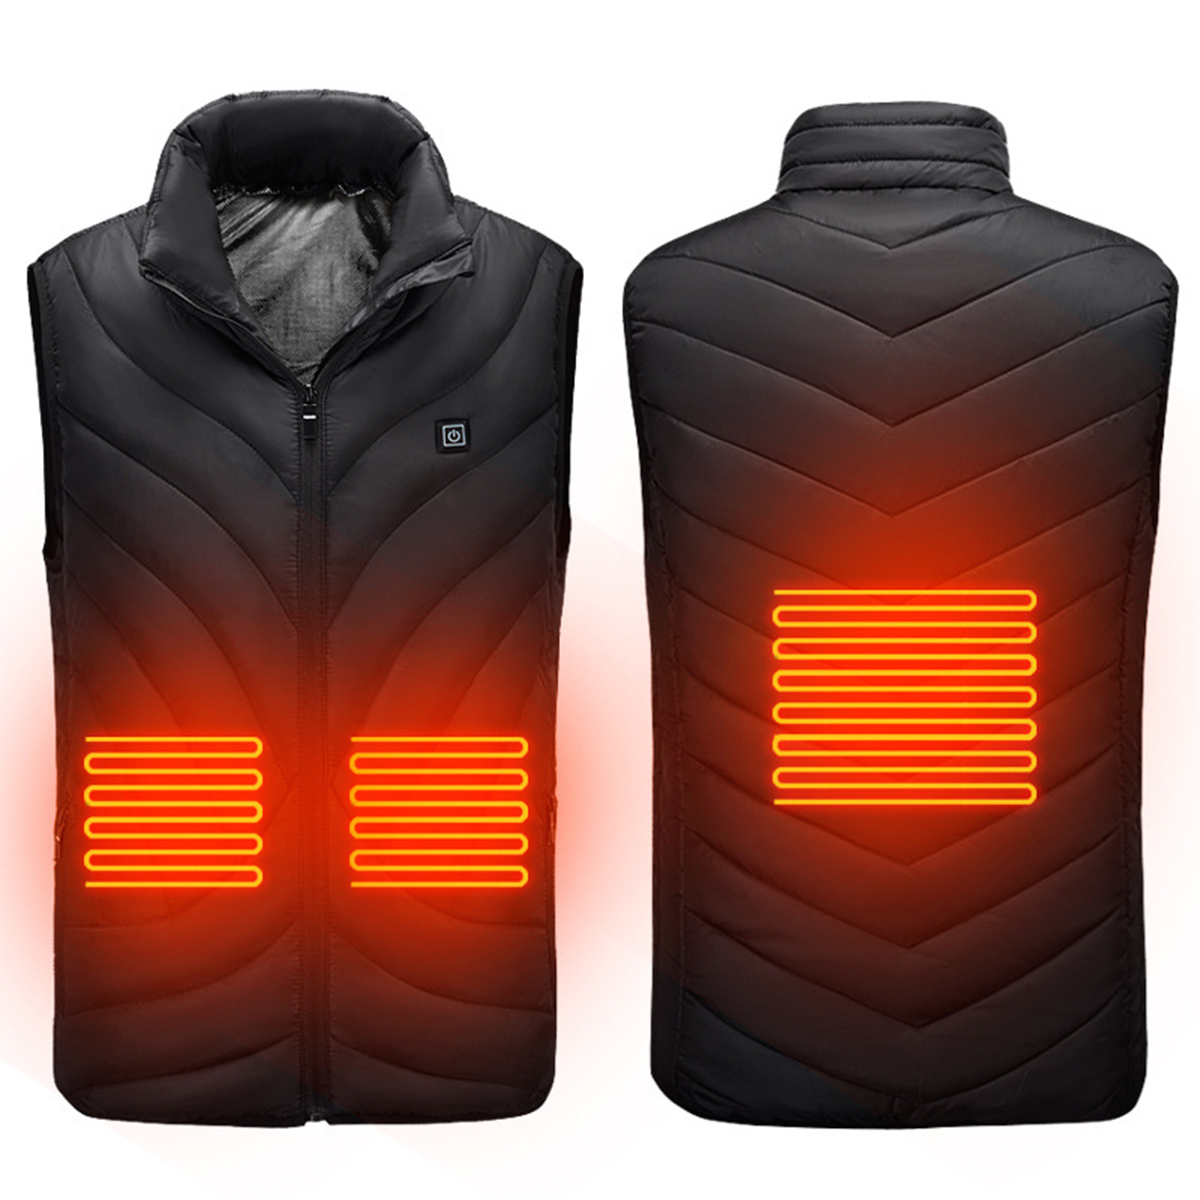 

Red/Black 5V USB Heated Vest Men Winter Electrical Heated Sleeveless Jacket Outdoor Hiking